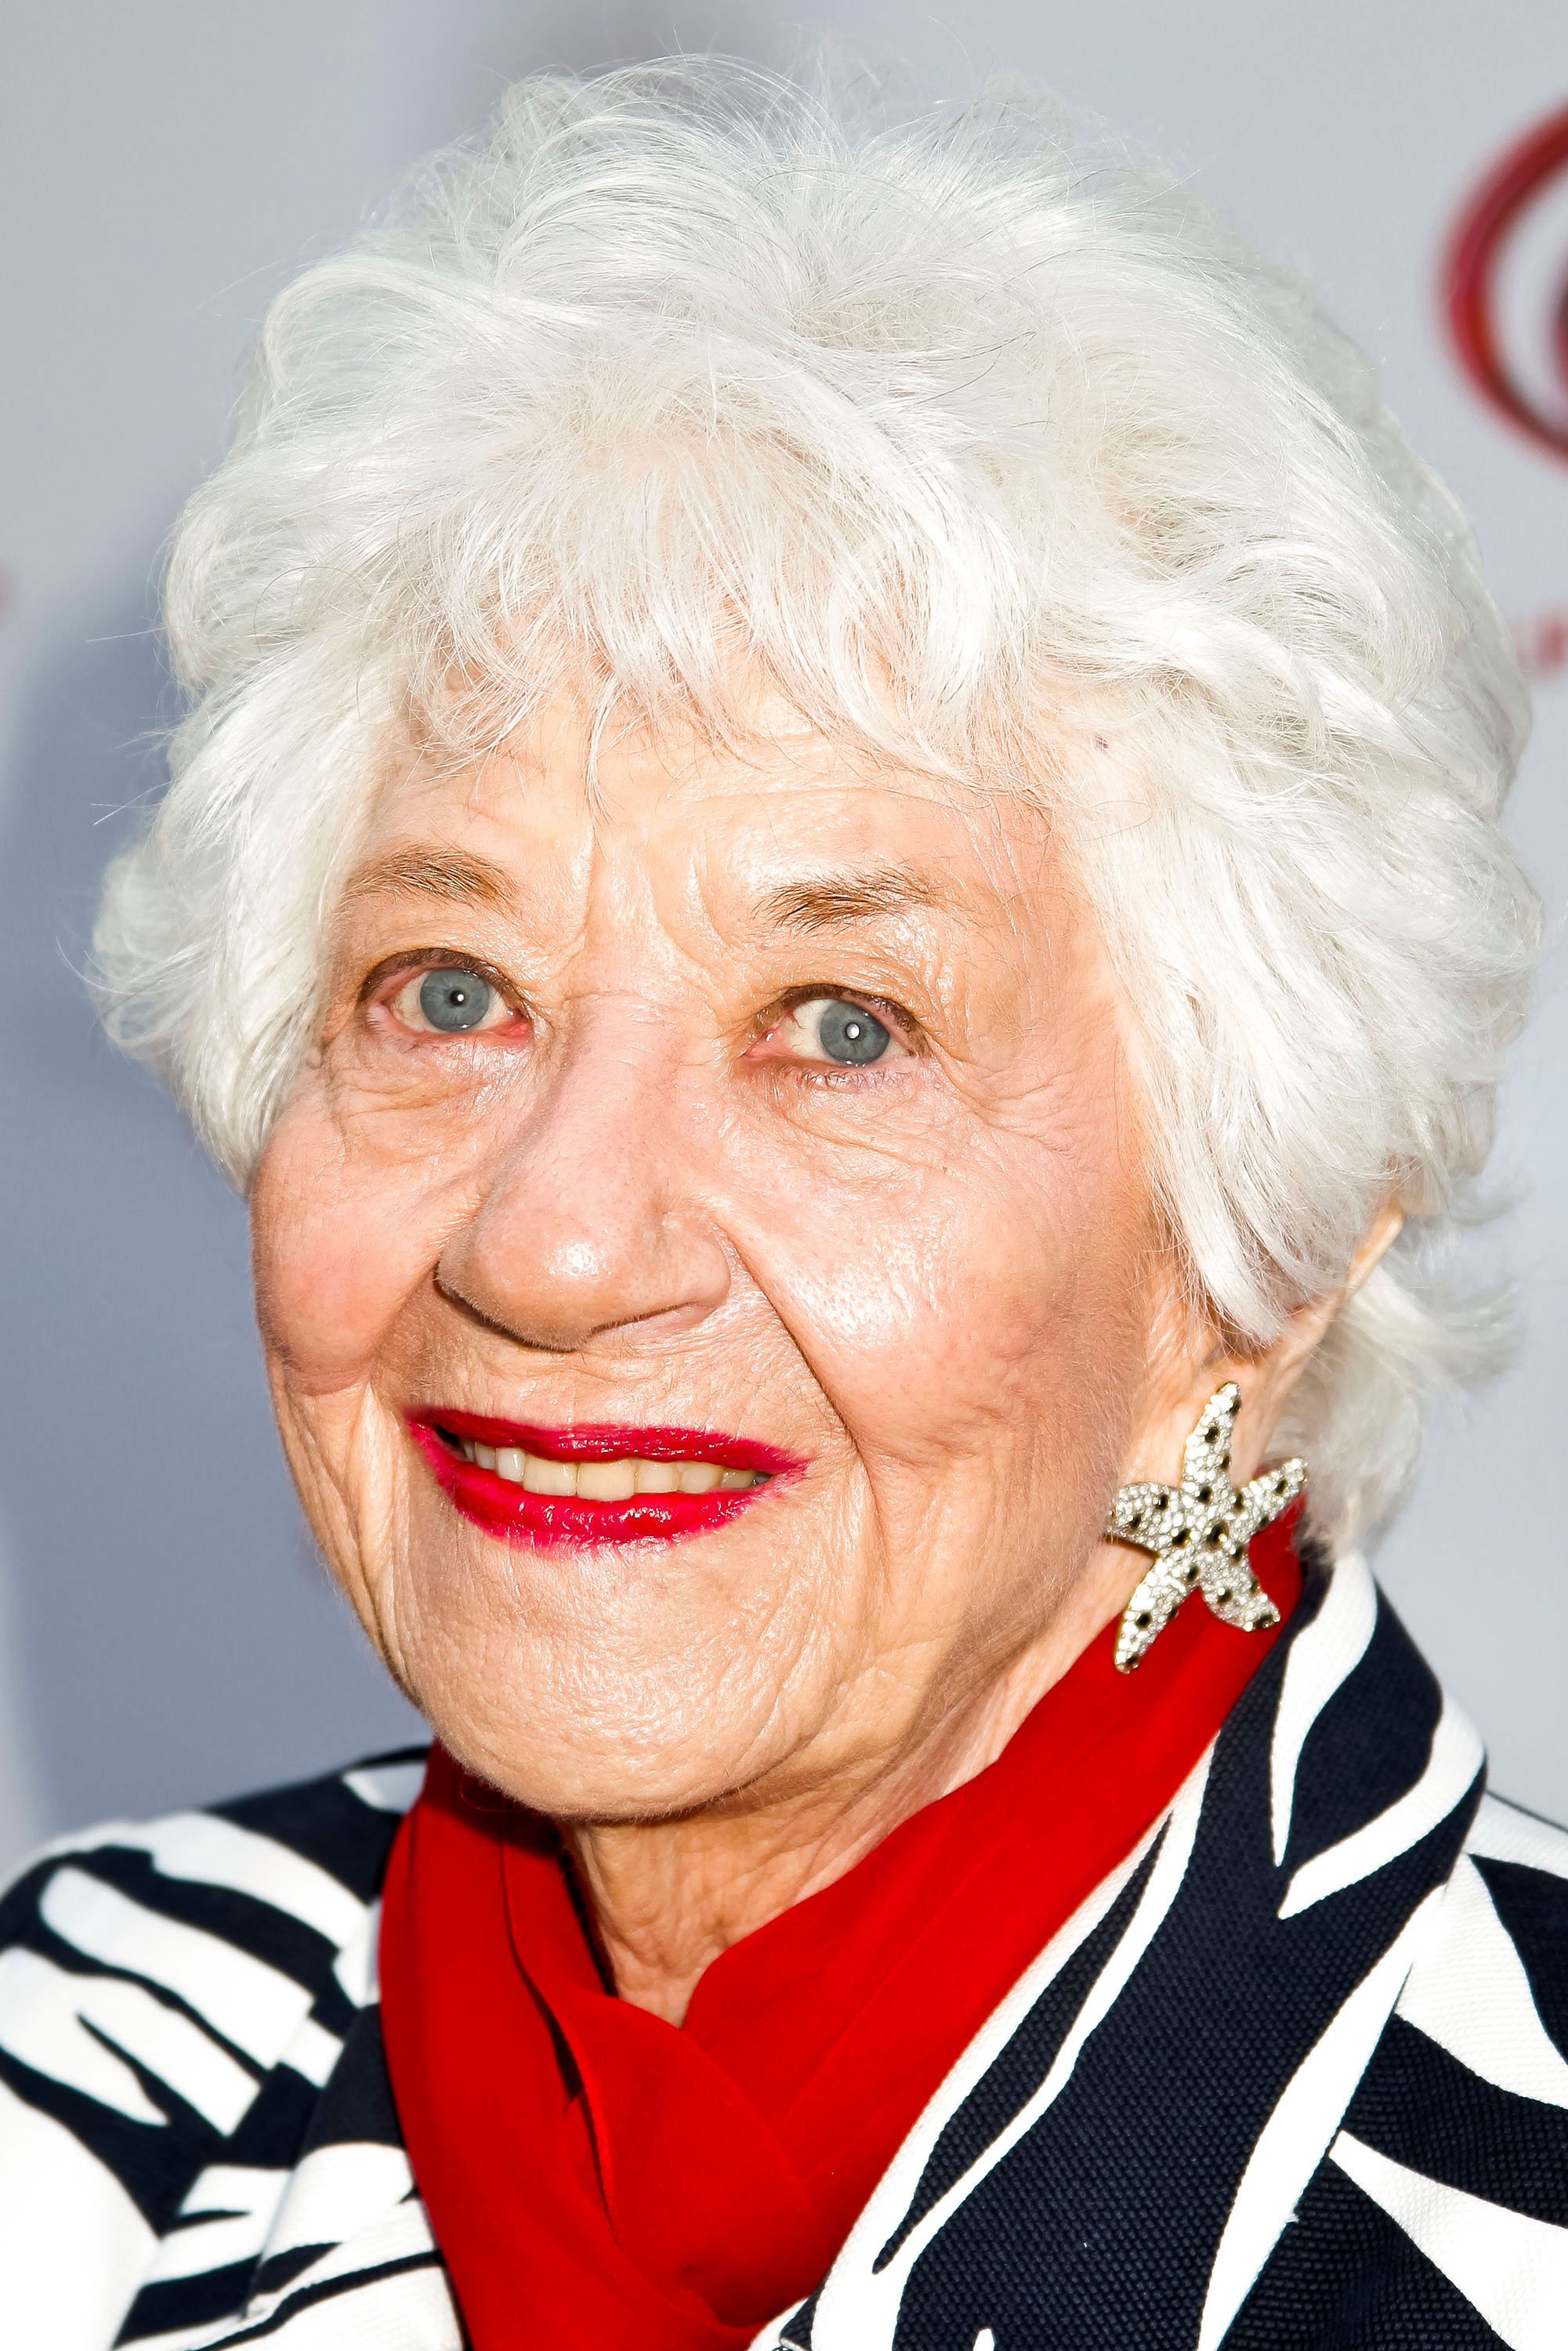 Charlotte Rae attends the 'The Waltons' 40th anniversary reunion at the Wilshire Ebell Theatre on September 29, 2012. | Source: Getty Images